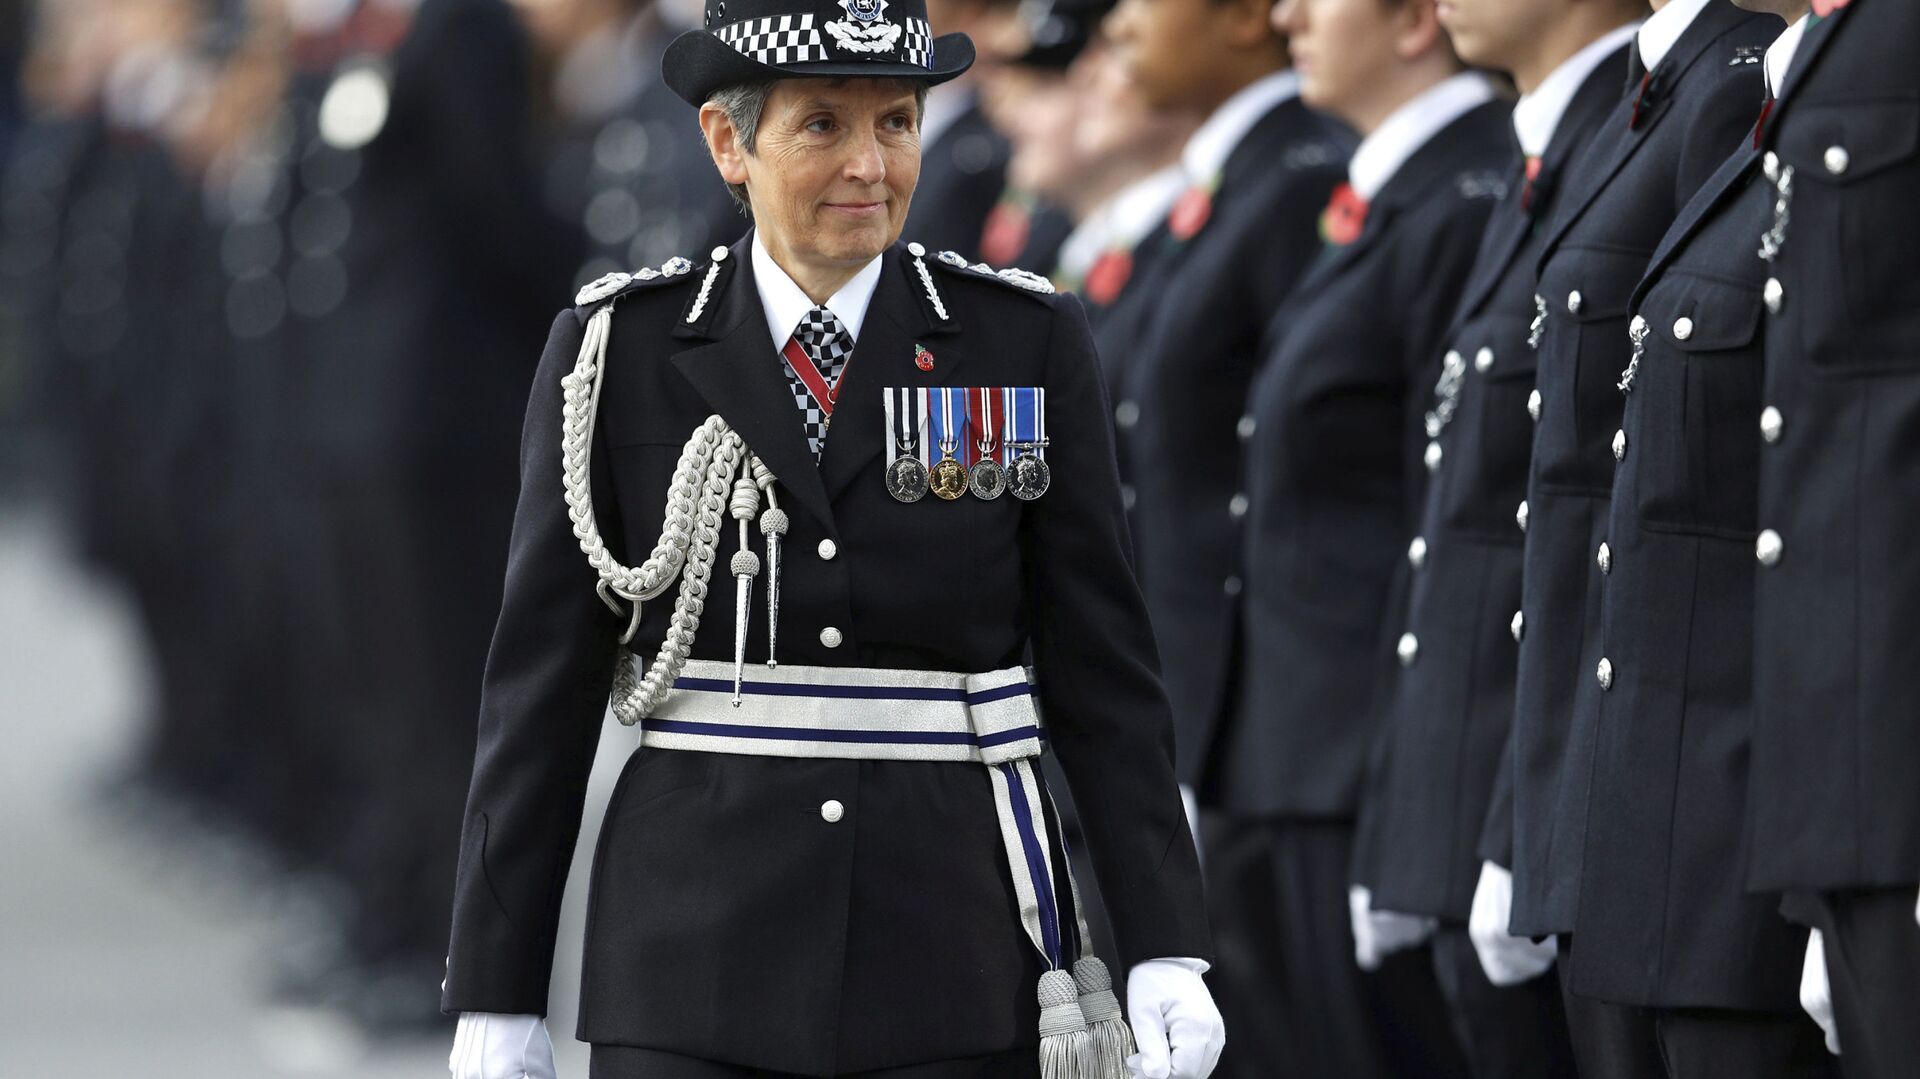 Britain's Metropolitan Police Commissioner Cressida Dick inspects police cadets at the Metropolitan Police Service Passing Out Parade at Hendon, in London, Friday Nov. 3, 2017 - Sputnik International, 1920, 09.09.2021